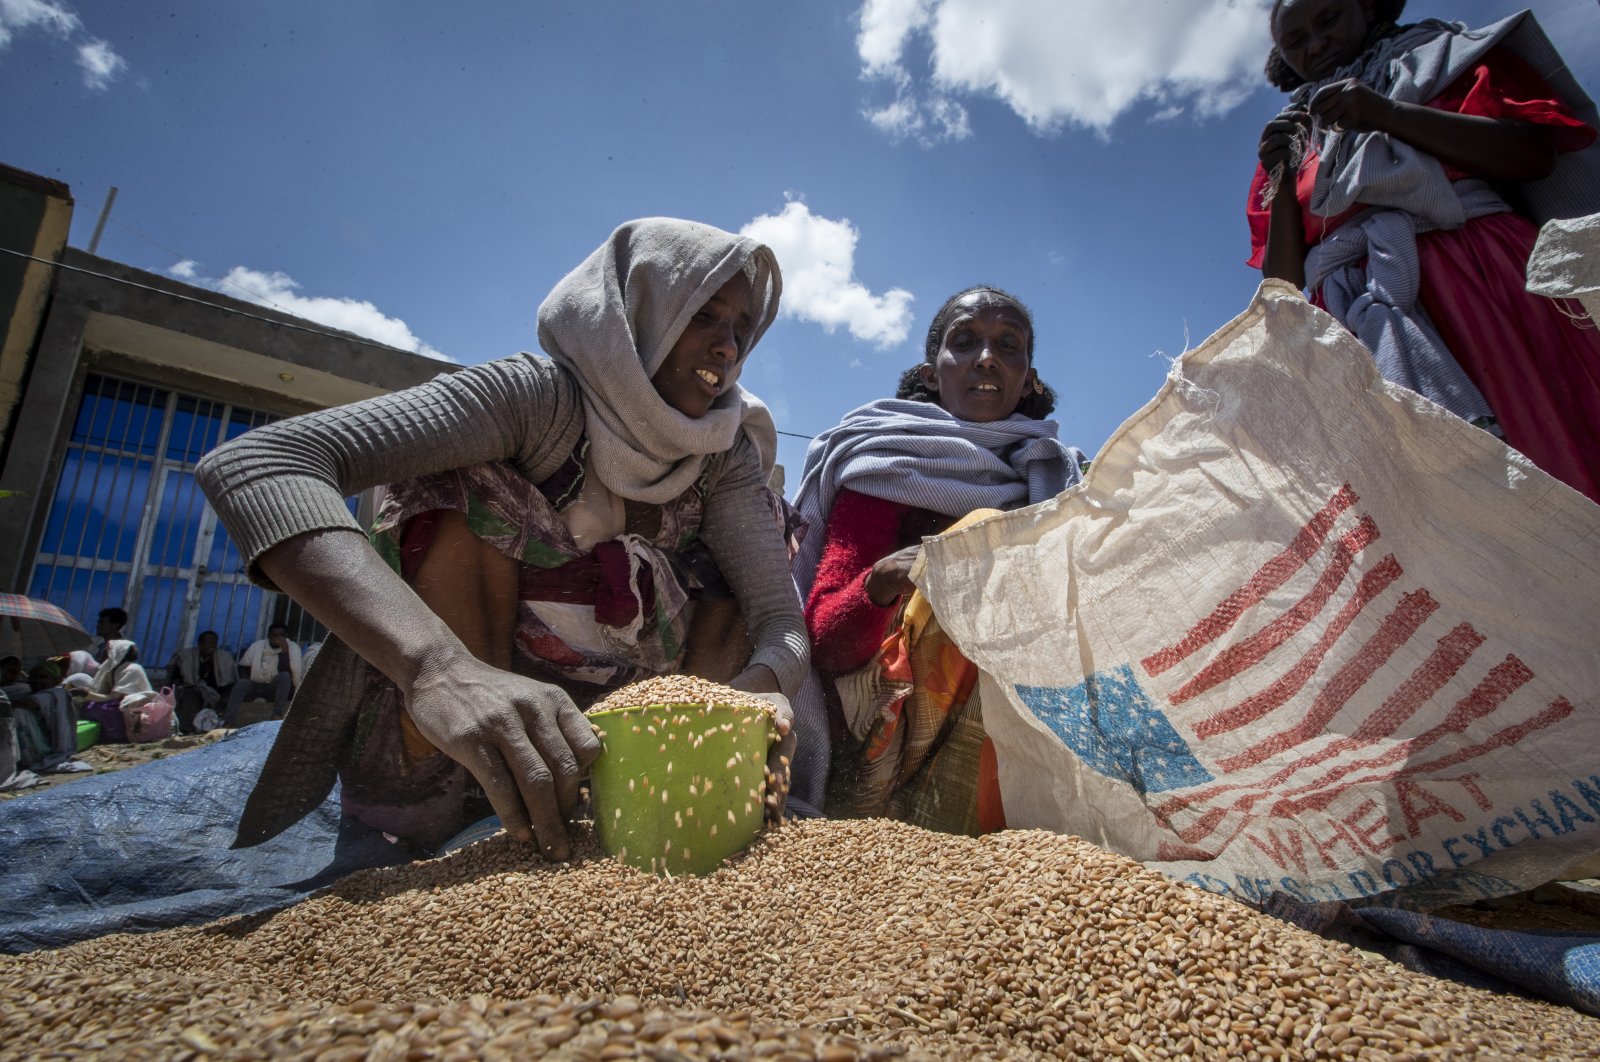 An Ethiopian woman scoops up portions of wheat to be allocated to each waiting family after it was distributed by the Relief Society of Tigray in the town of Agula, in the Tigray region of northern Ethiopia on May 8, 2021. (AP File Photo)